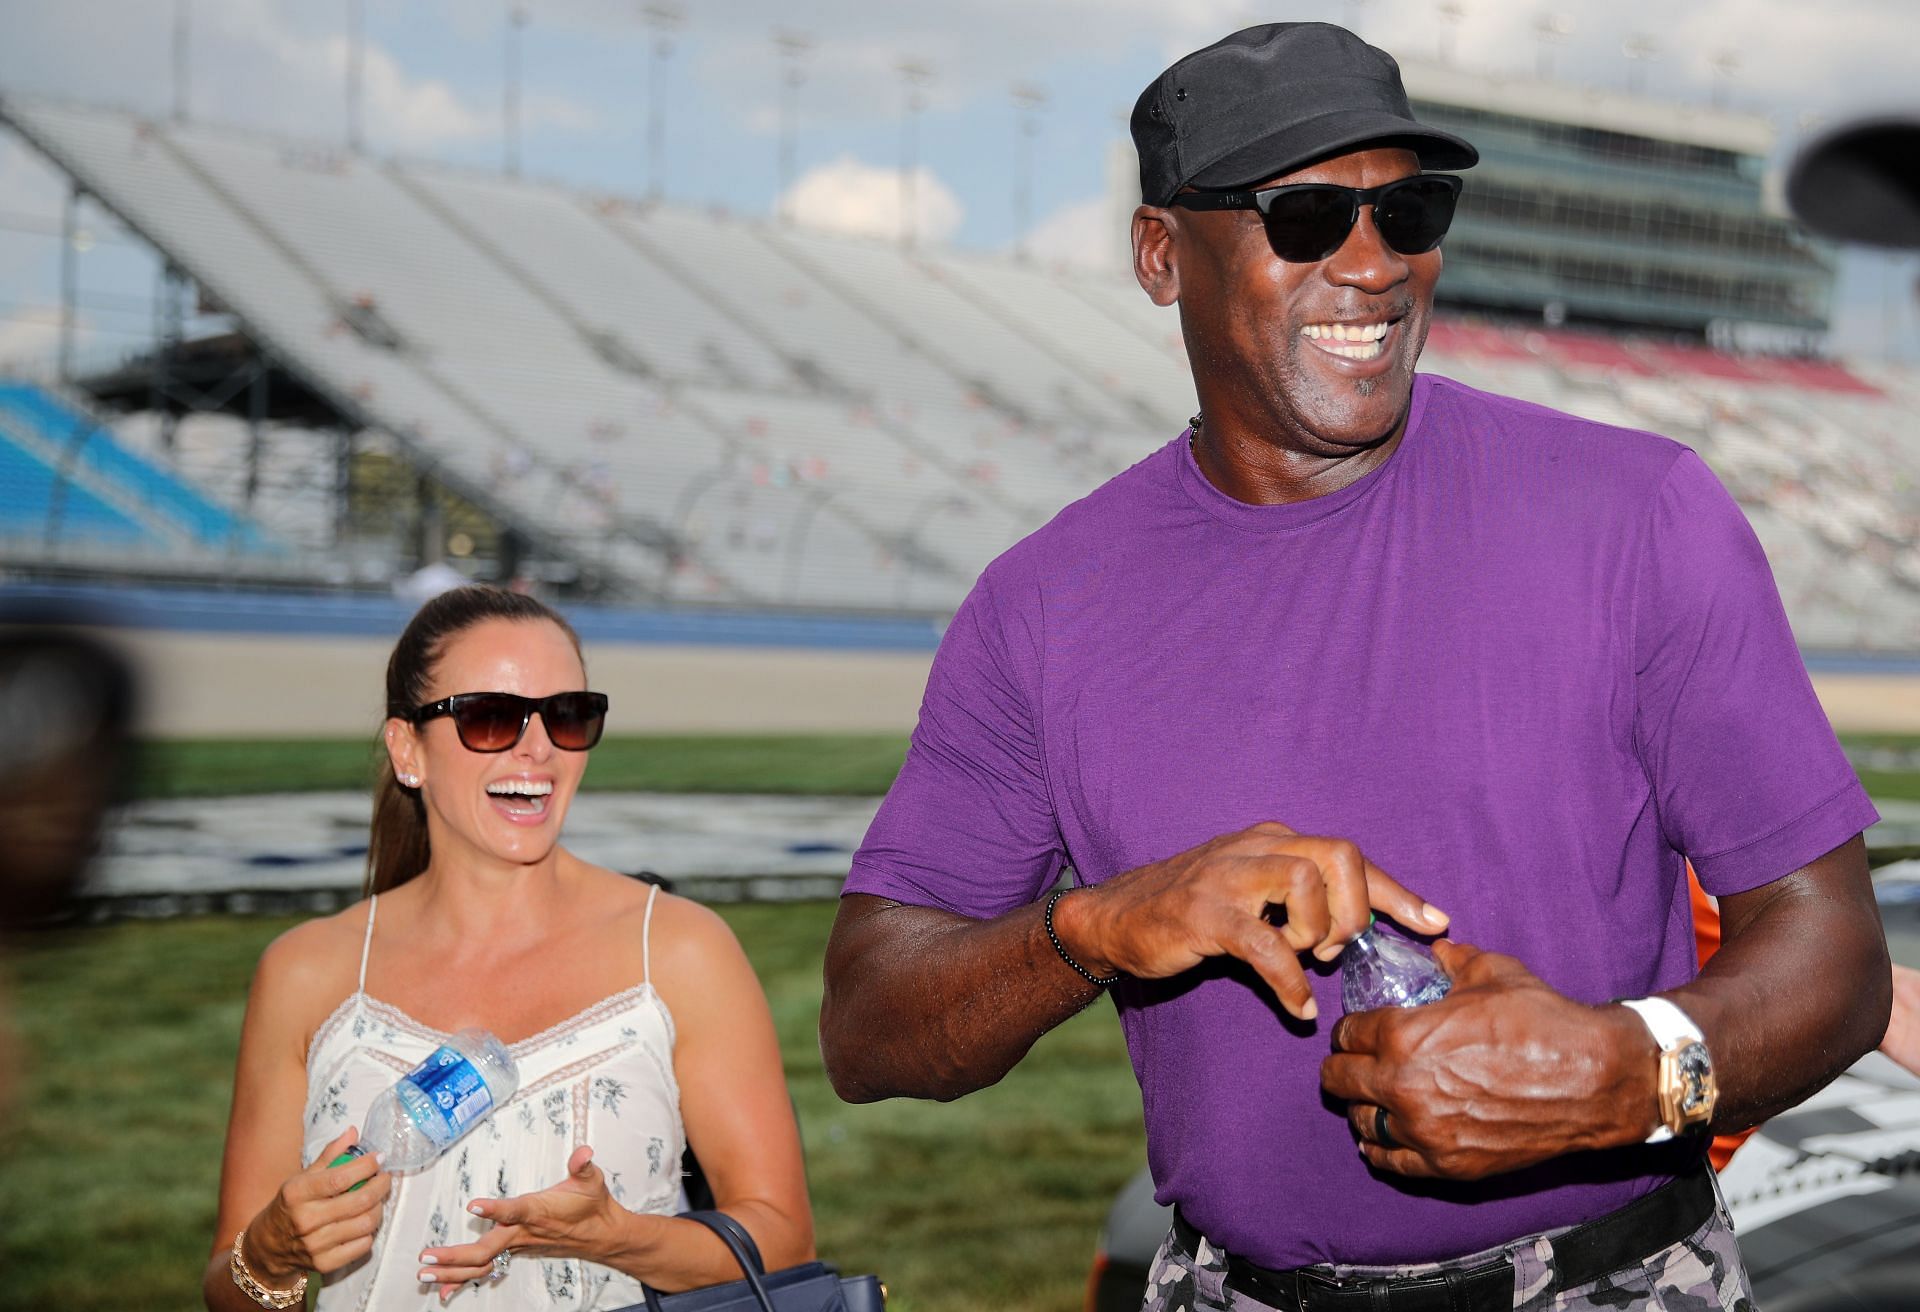 NBA Hall of Famer Michael Jordan and co-owner of 23XI Racing walks the grid with his wife, Yvette Prieto during qualifying for the NASCAR Cup Series Ally 400 at Nashville Superspeedway on June 25, 2022 in Lebanon, Tennessee.